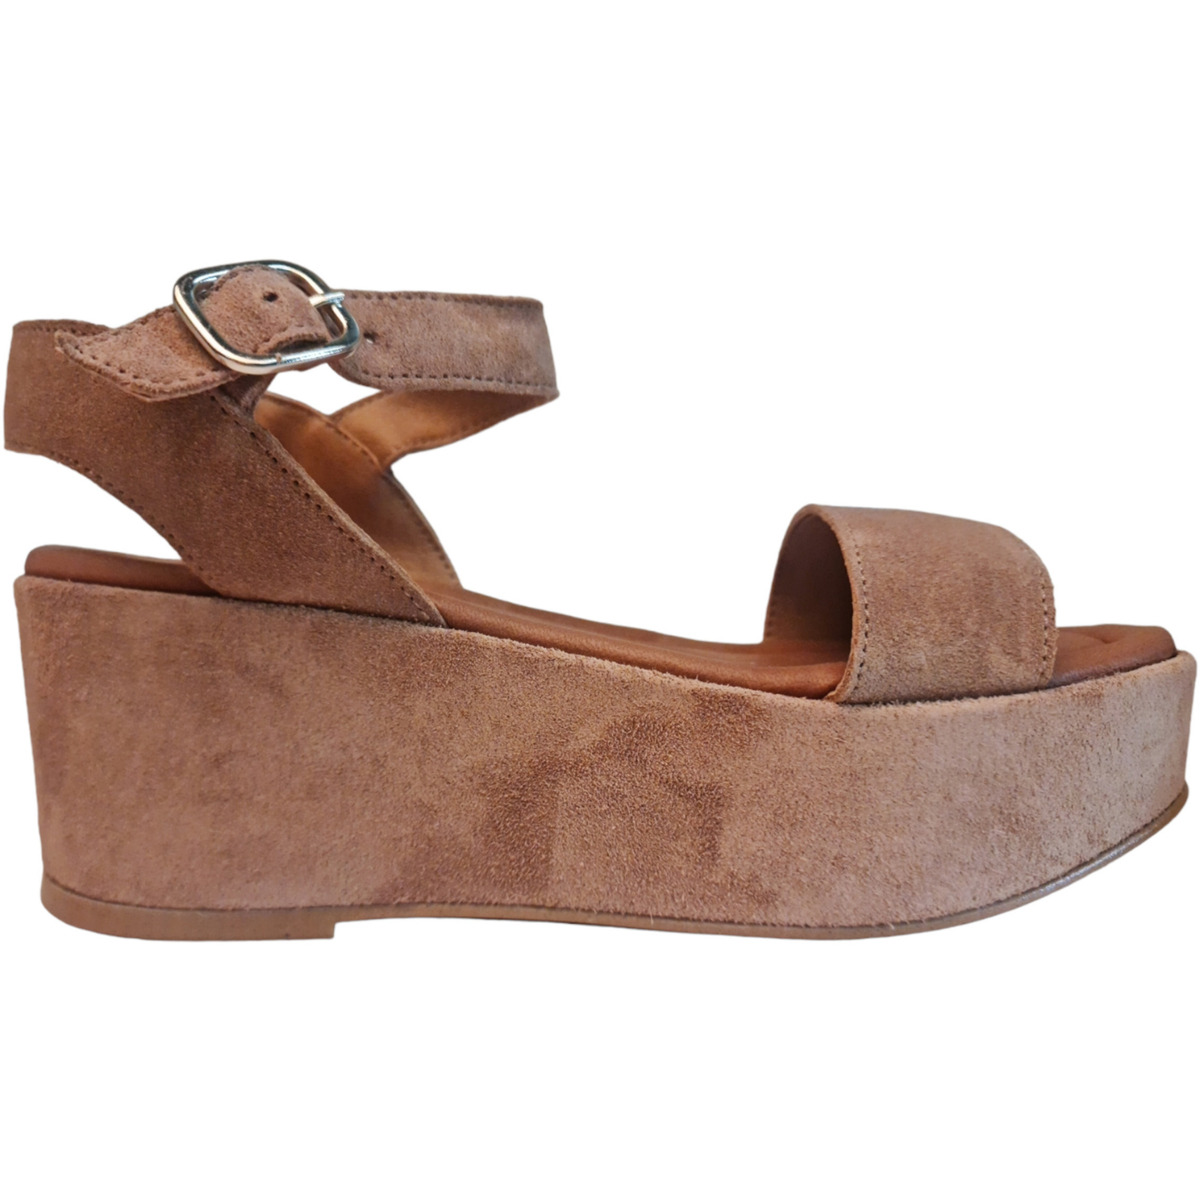 Chaussures Femme Fruit Of The Loo Belang BENU05831MA Marron